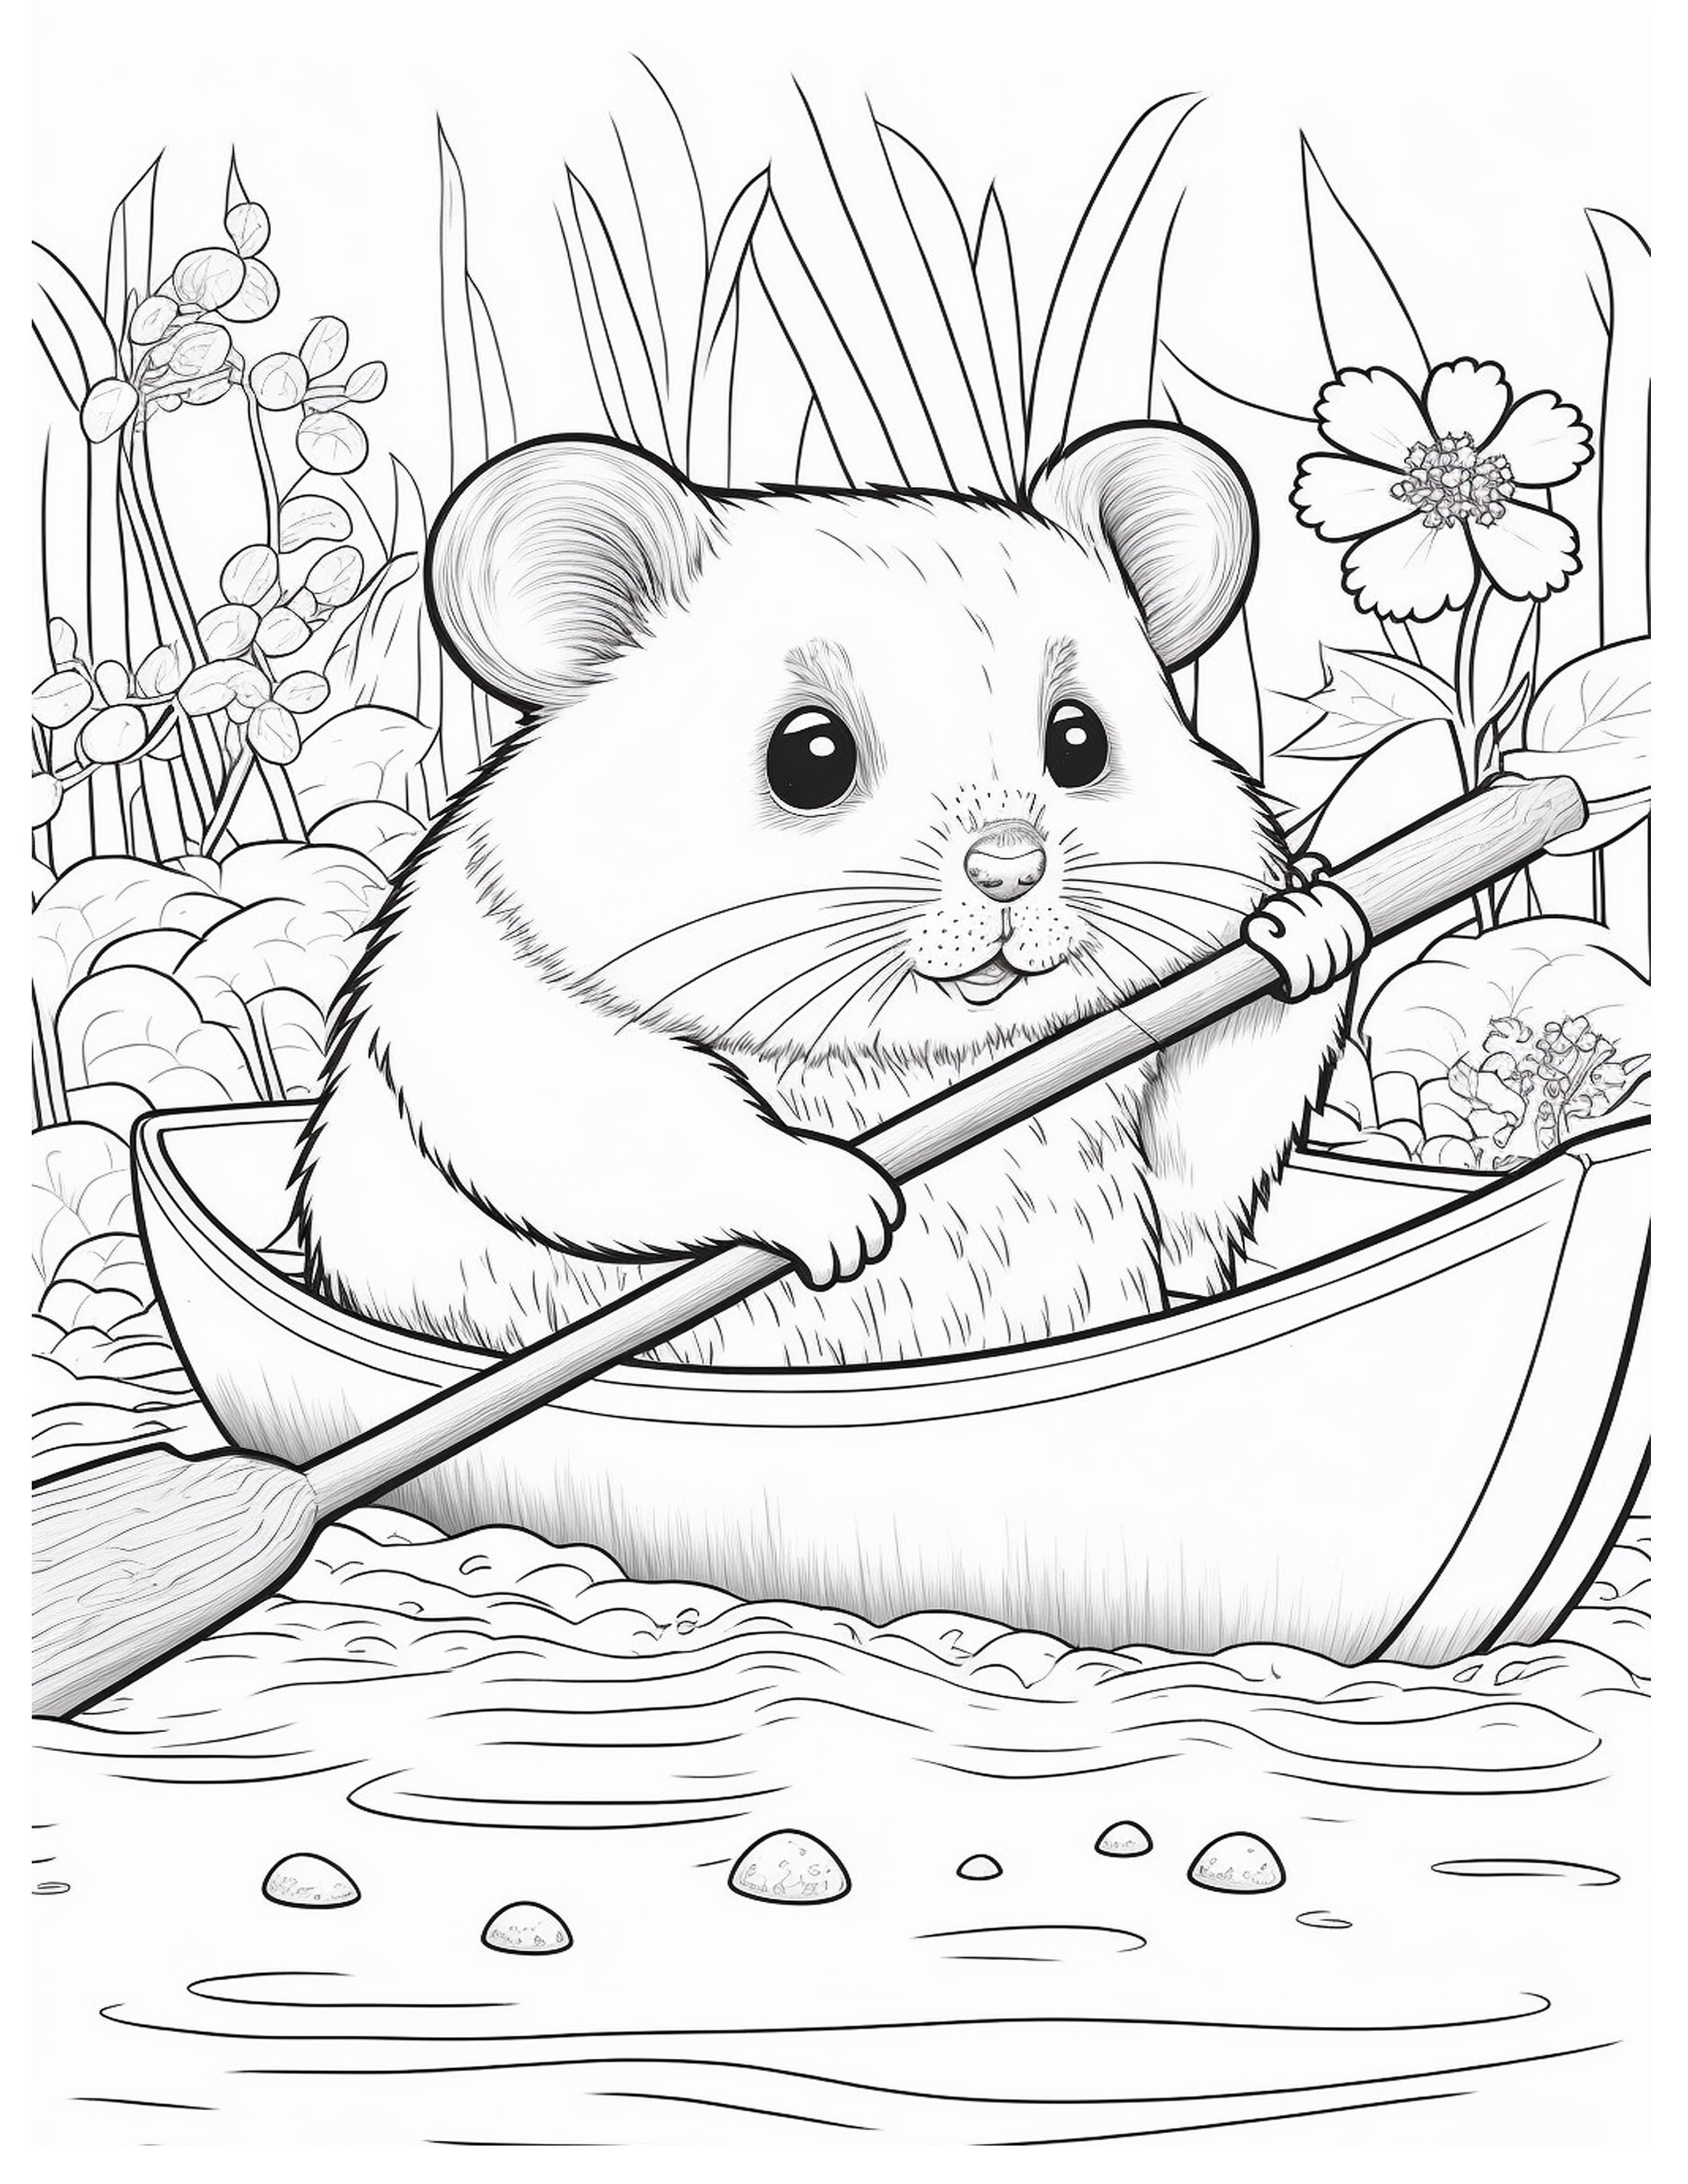 Hamster Coloring Pages Over 50 Pages of Hamsters in Everyday - Etsy